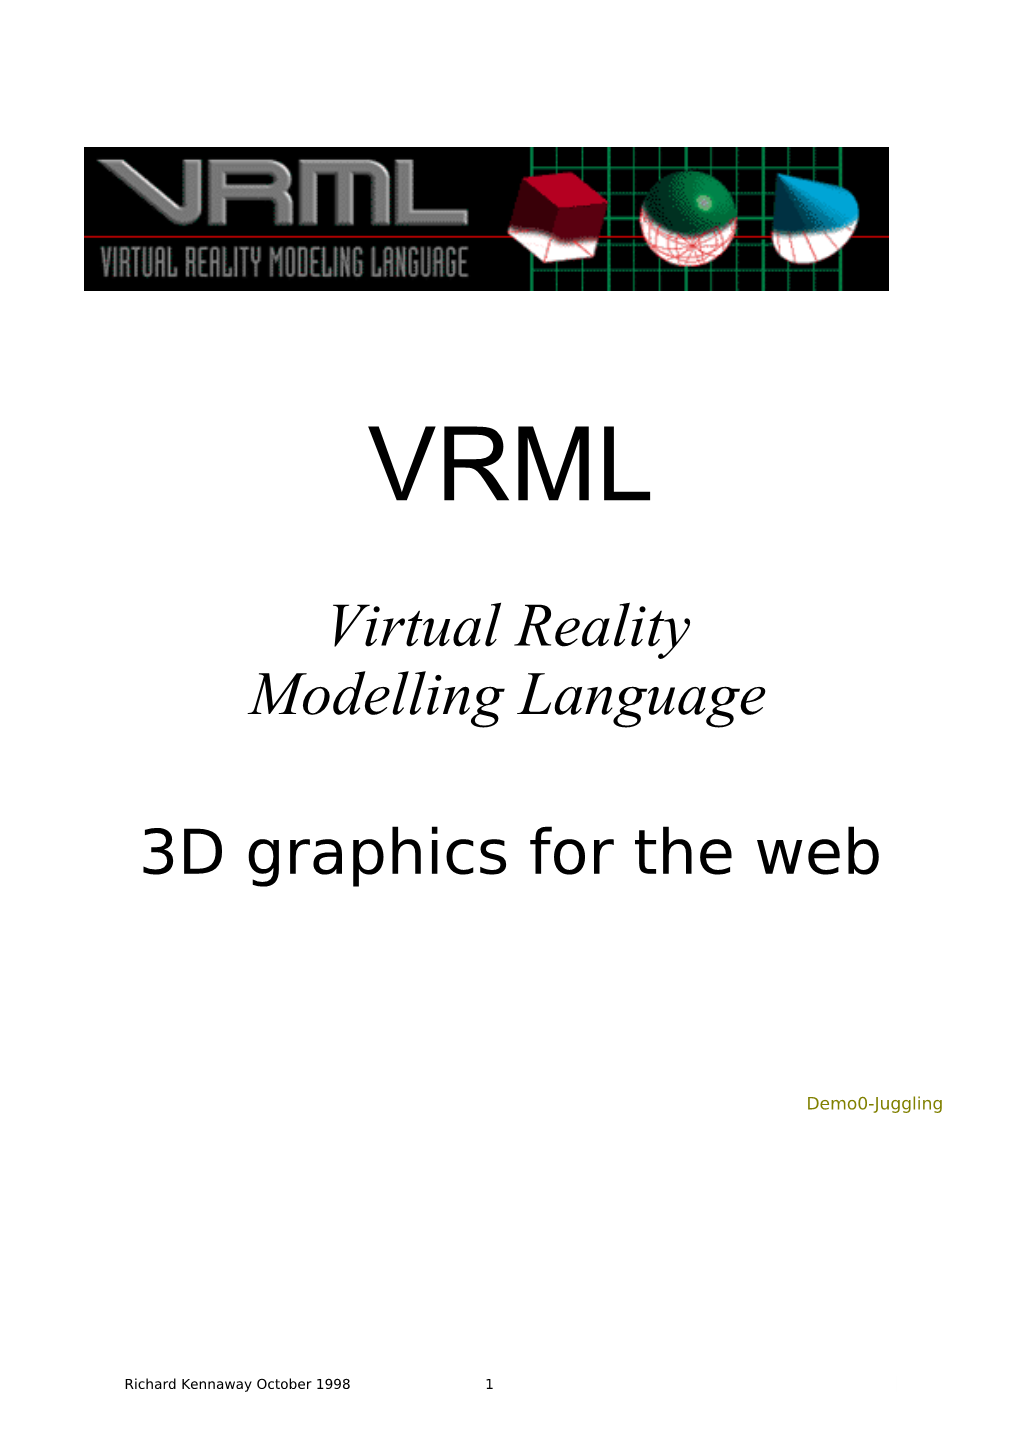 3D Graphics for the Web